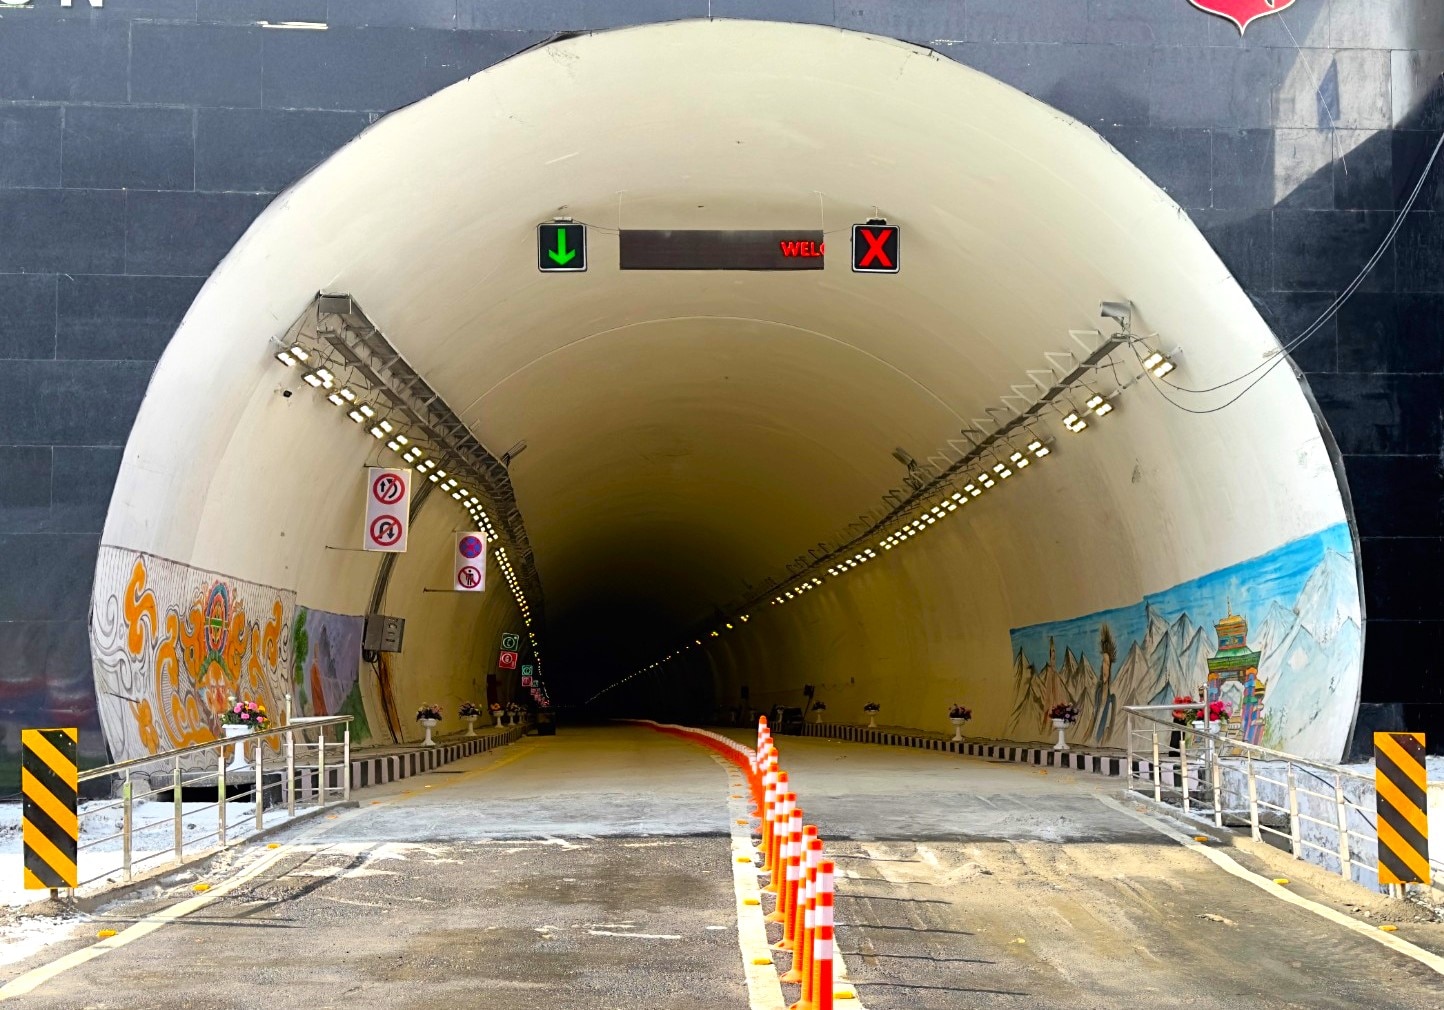 Explained: Construction Of Arunachal Pradesh’s Sela Tunnel And Boost To Defence Preparedness, Tourism